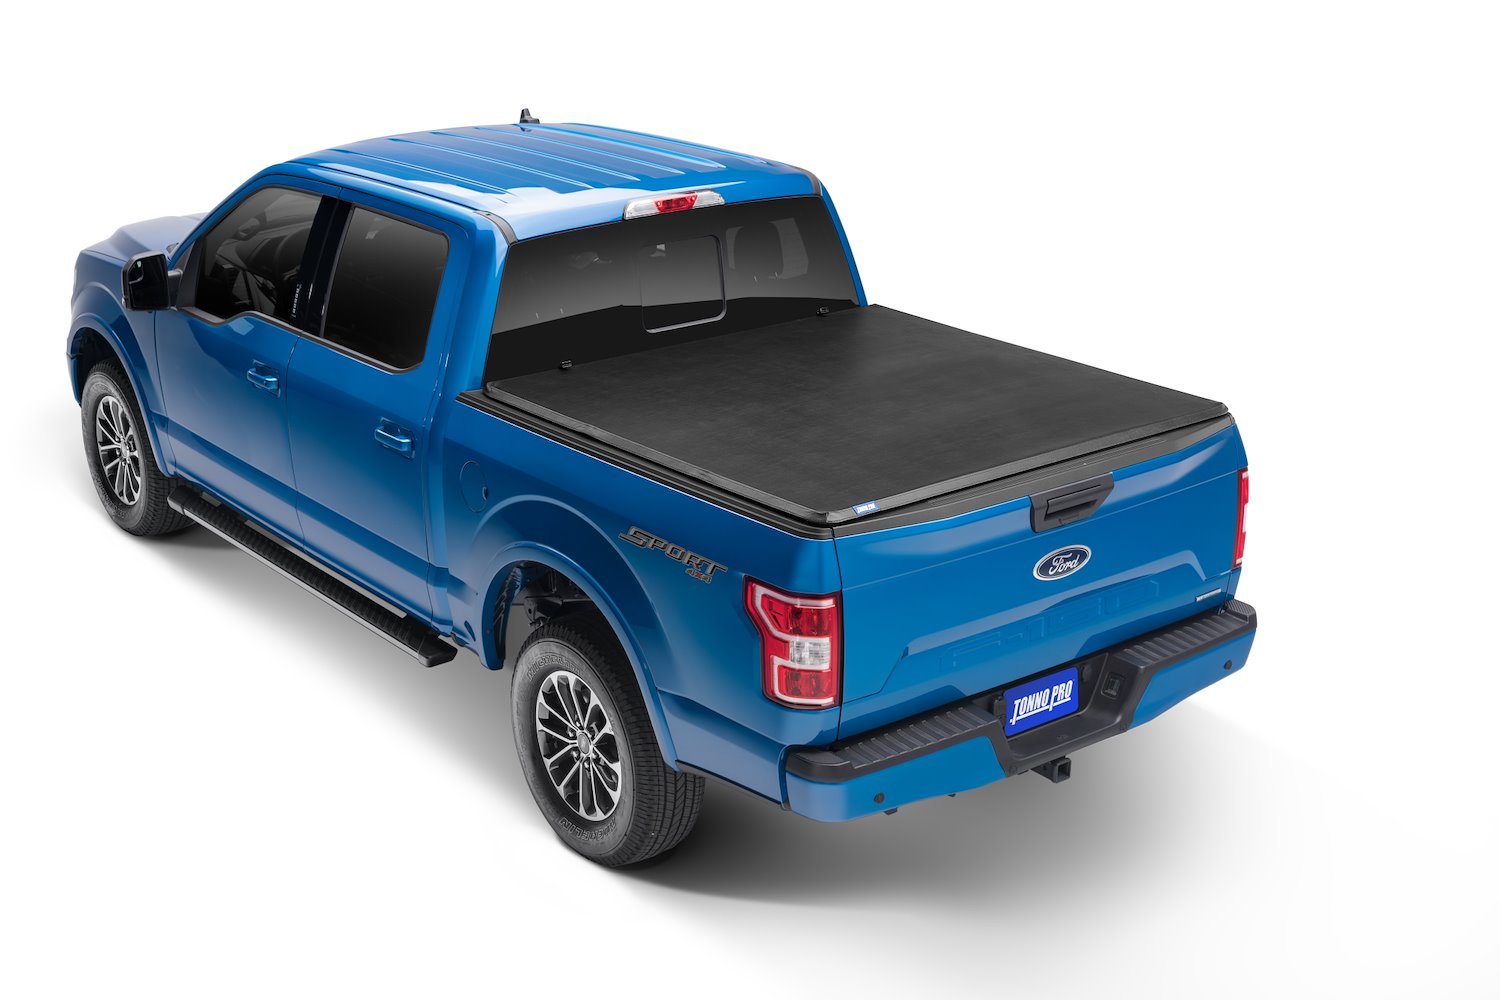 Hard Fold Tri-Fold Tonneau Cover Fits Select Ford F-150 Trucks [8 ft. 2 in. Bed]